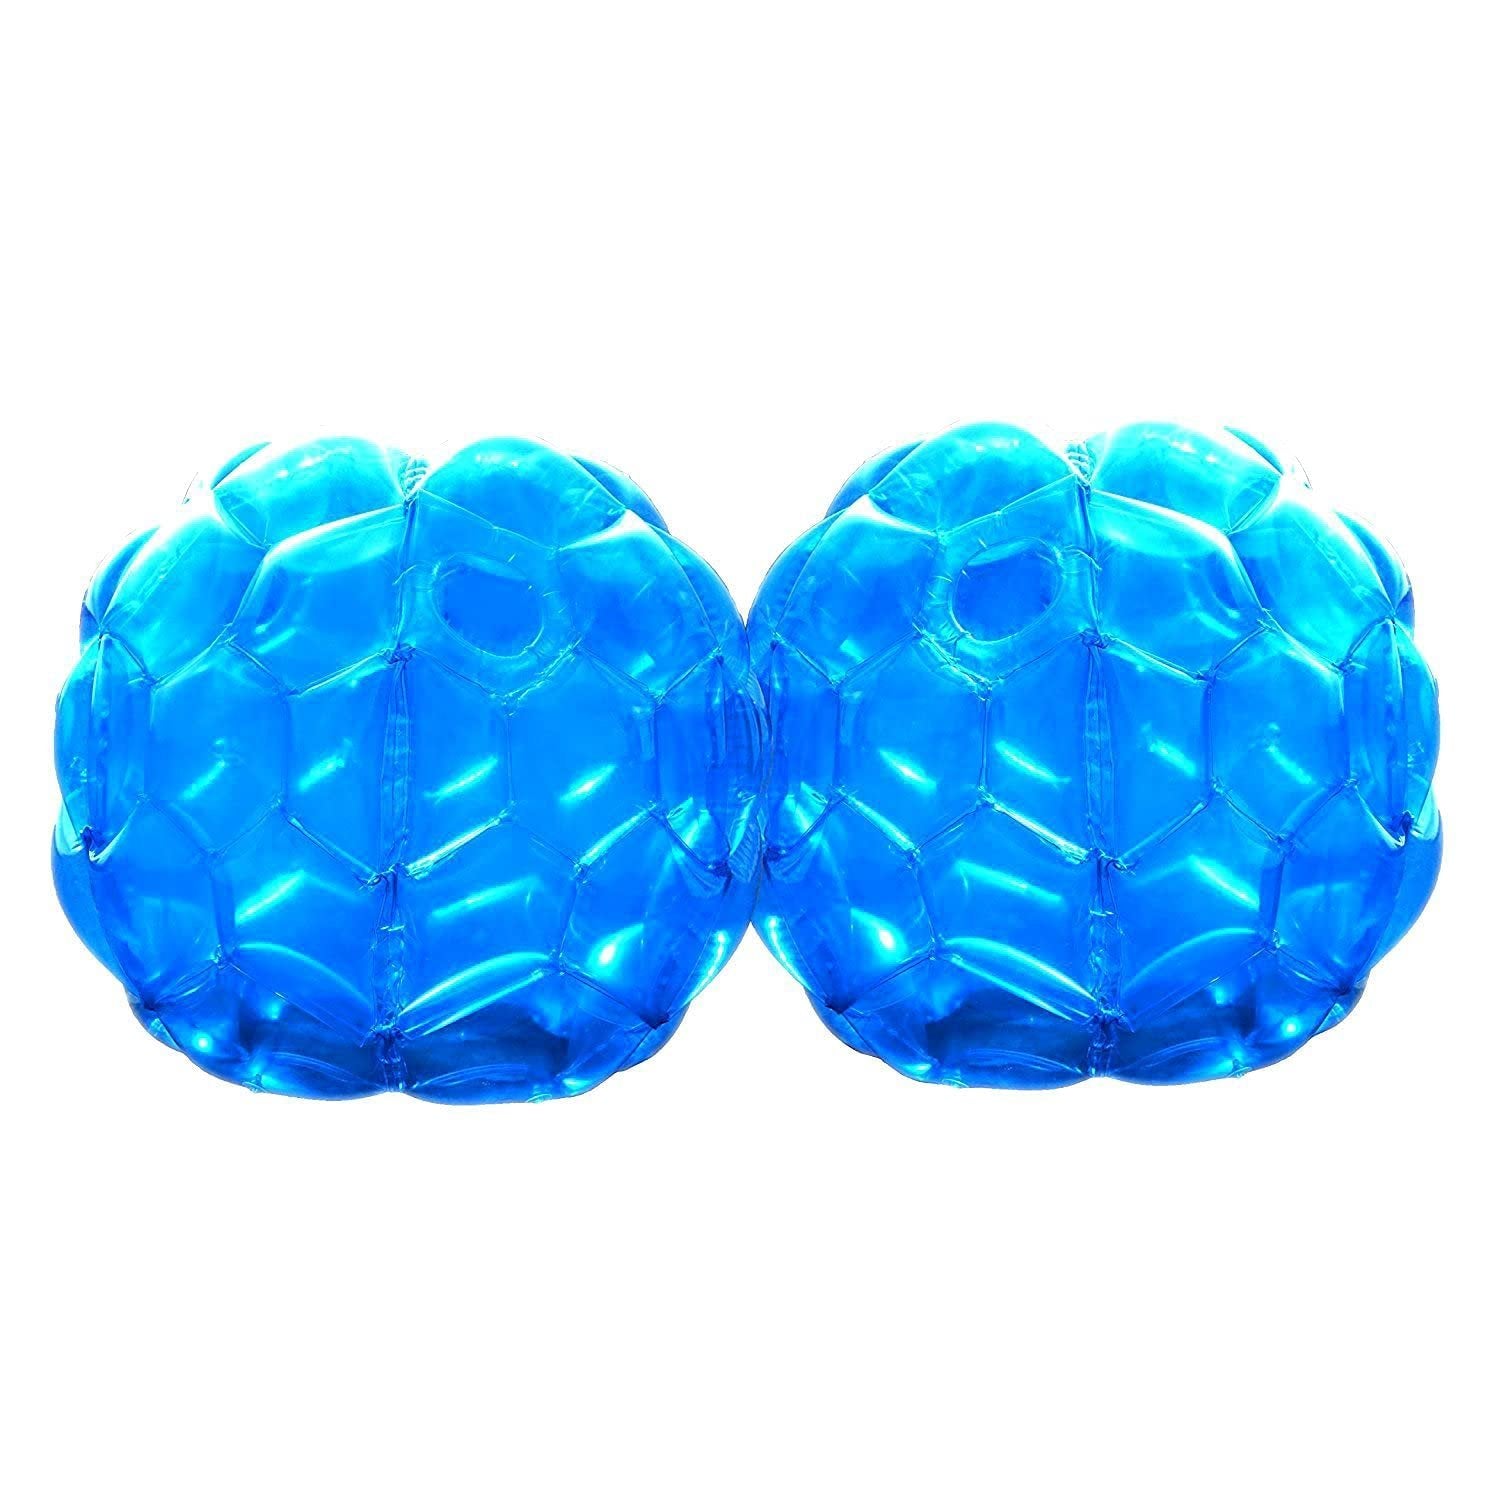 GoBroBrand Bubble Bumper Balls 2 pack of Inflatable Buddy hamster Bbop Ball set - Used also as Giga Sumo Wearable human zorb soccer Suits for outdoor play. Size: 36" For Kids & Adults of all ages